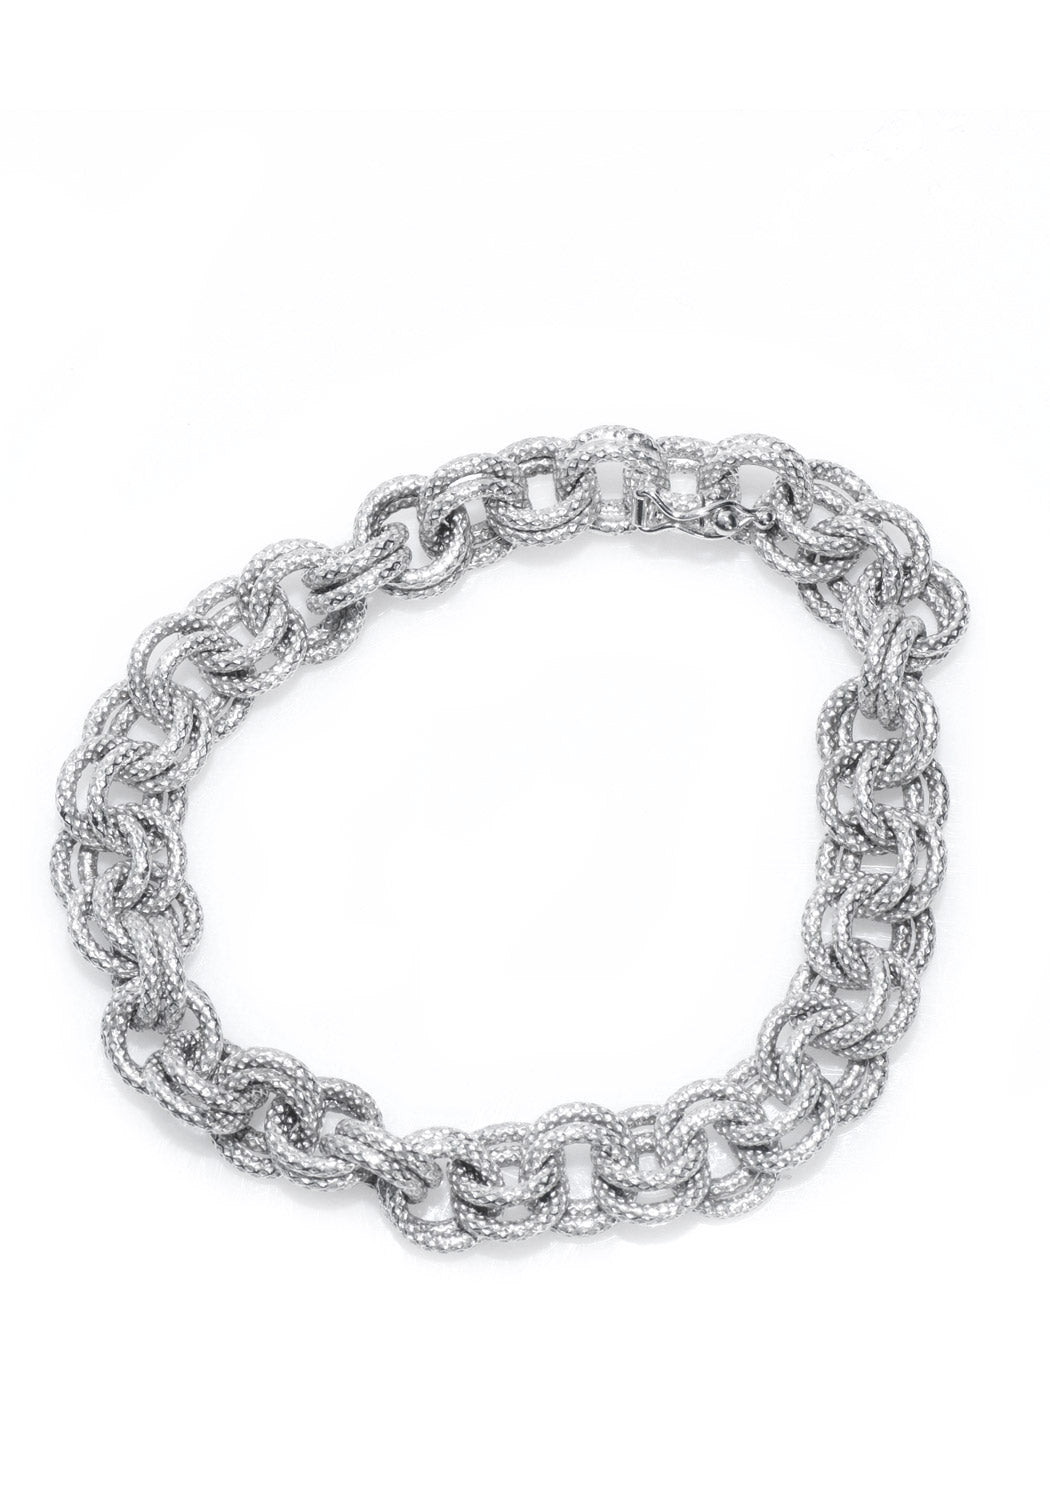 Marchisio Rolo Double Link White Gold Bracelet | Oster Jewelers 